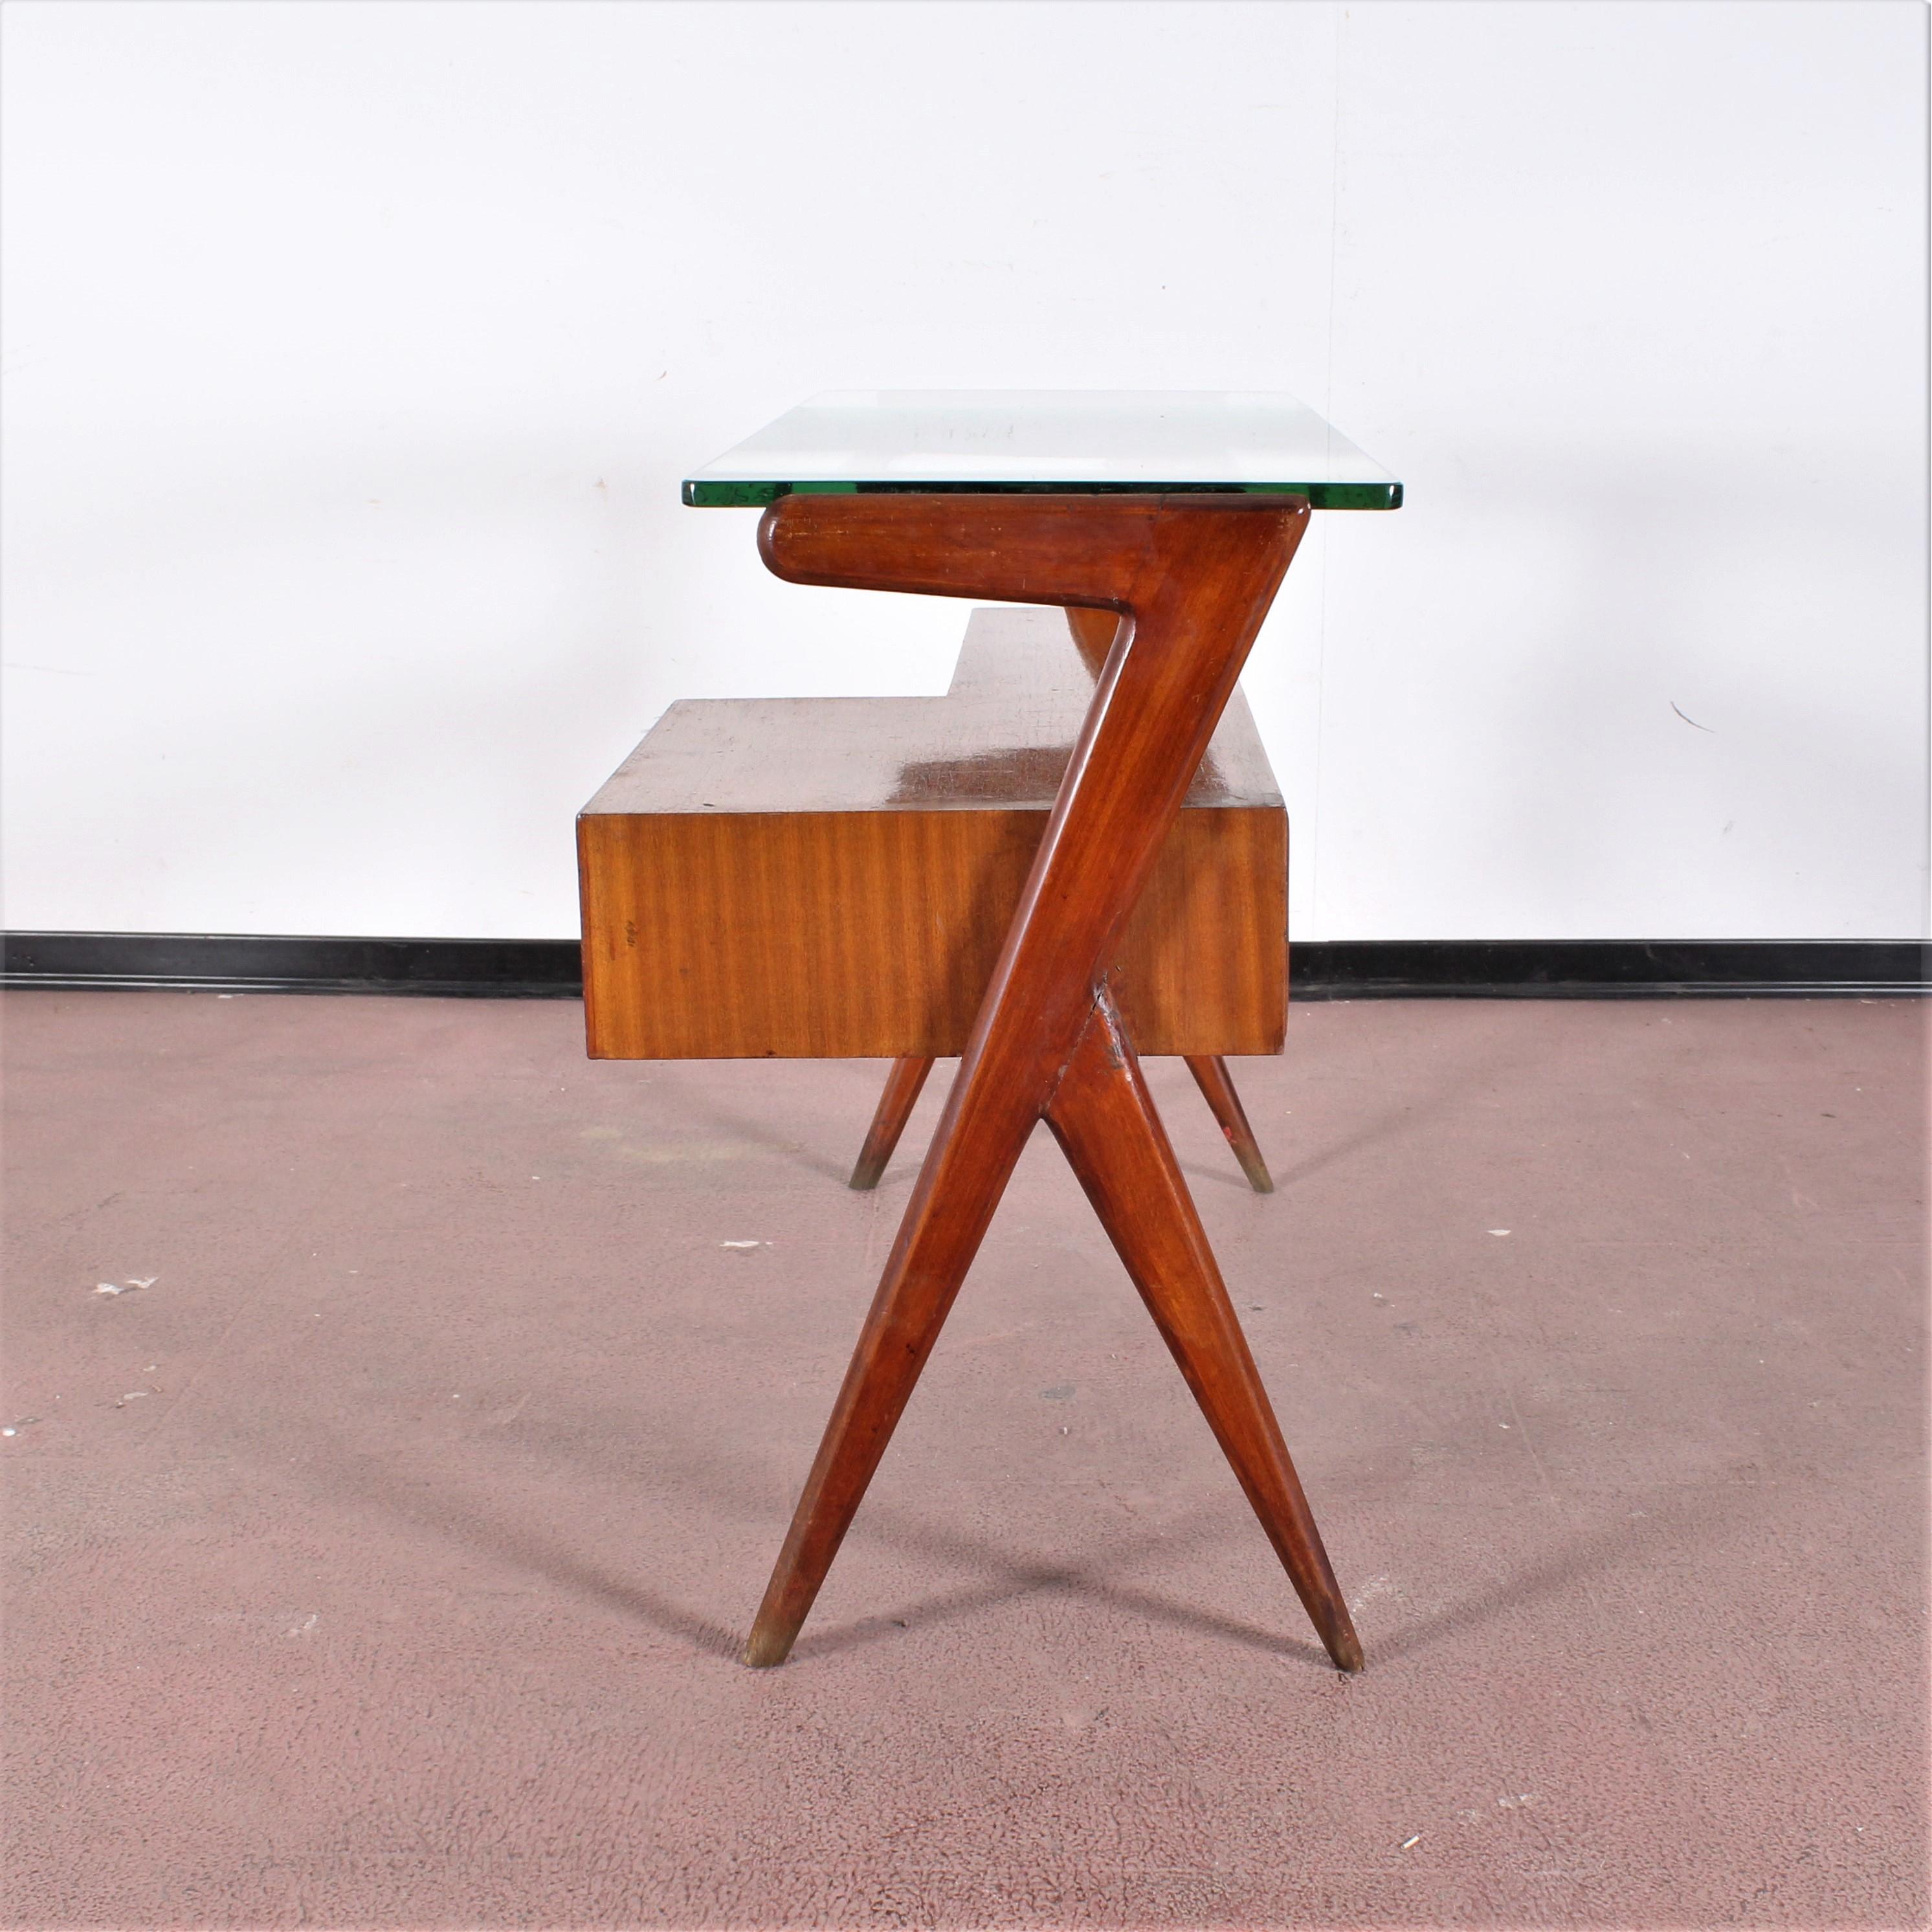 Beautiful small desk in light wood and rectangular top in thick glass with three drawers on the right side.
The attractive geometric line of the legs and the quality of the materials, make it attributable to Ico Parisi, Italy, 1950s.
Wear